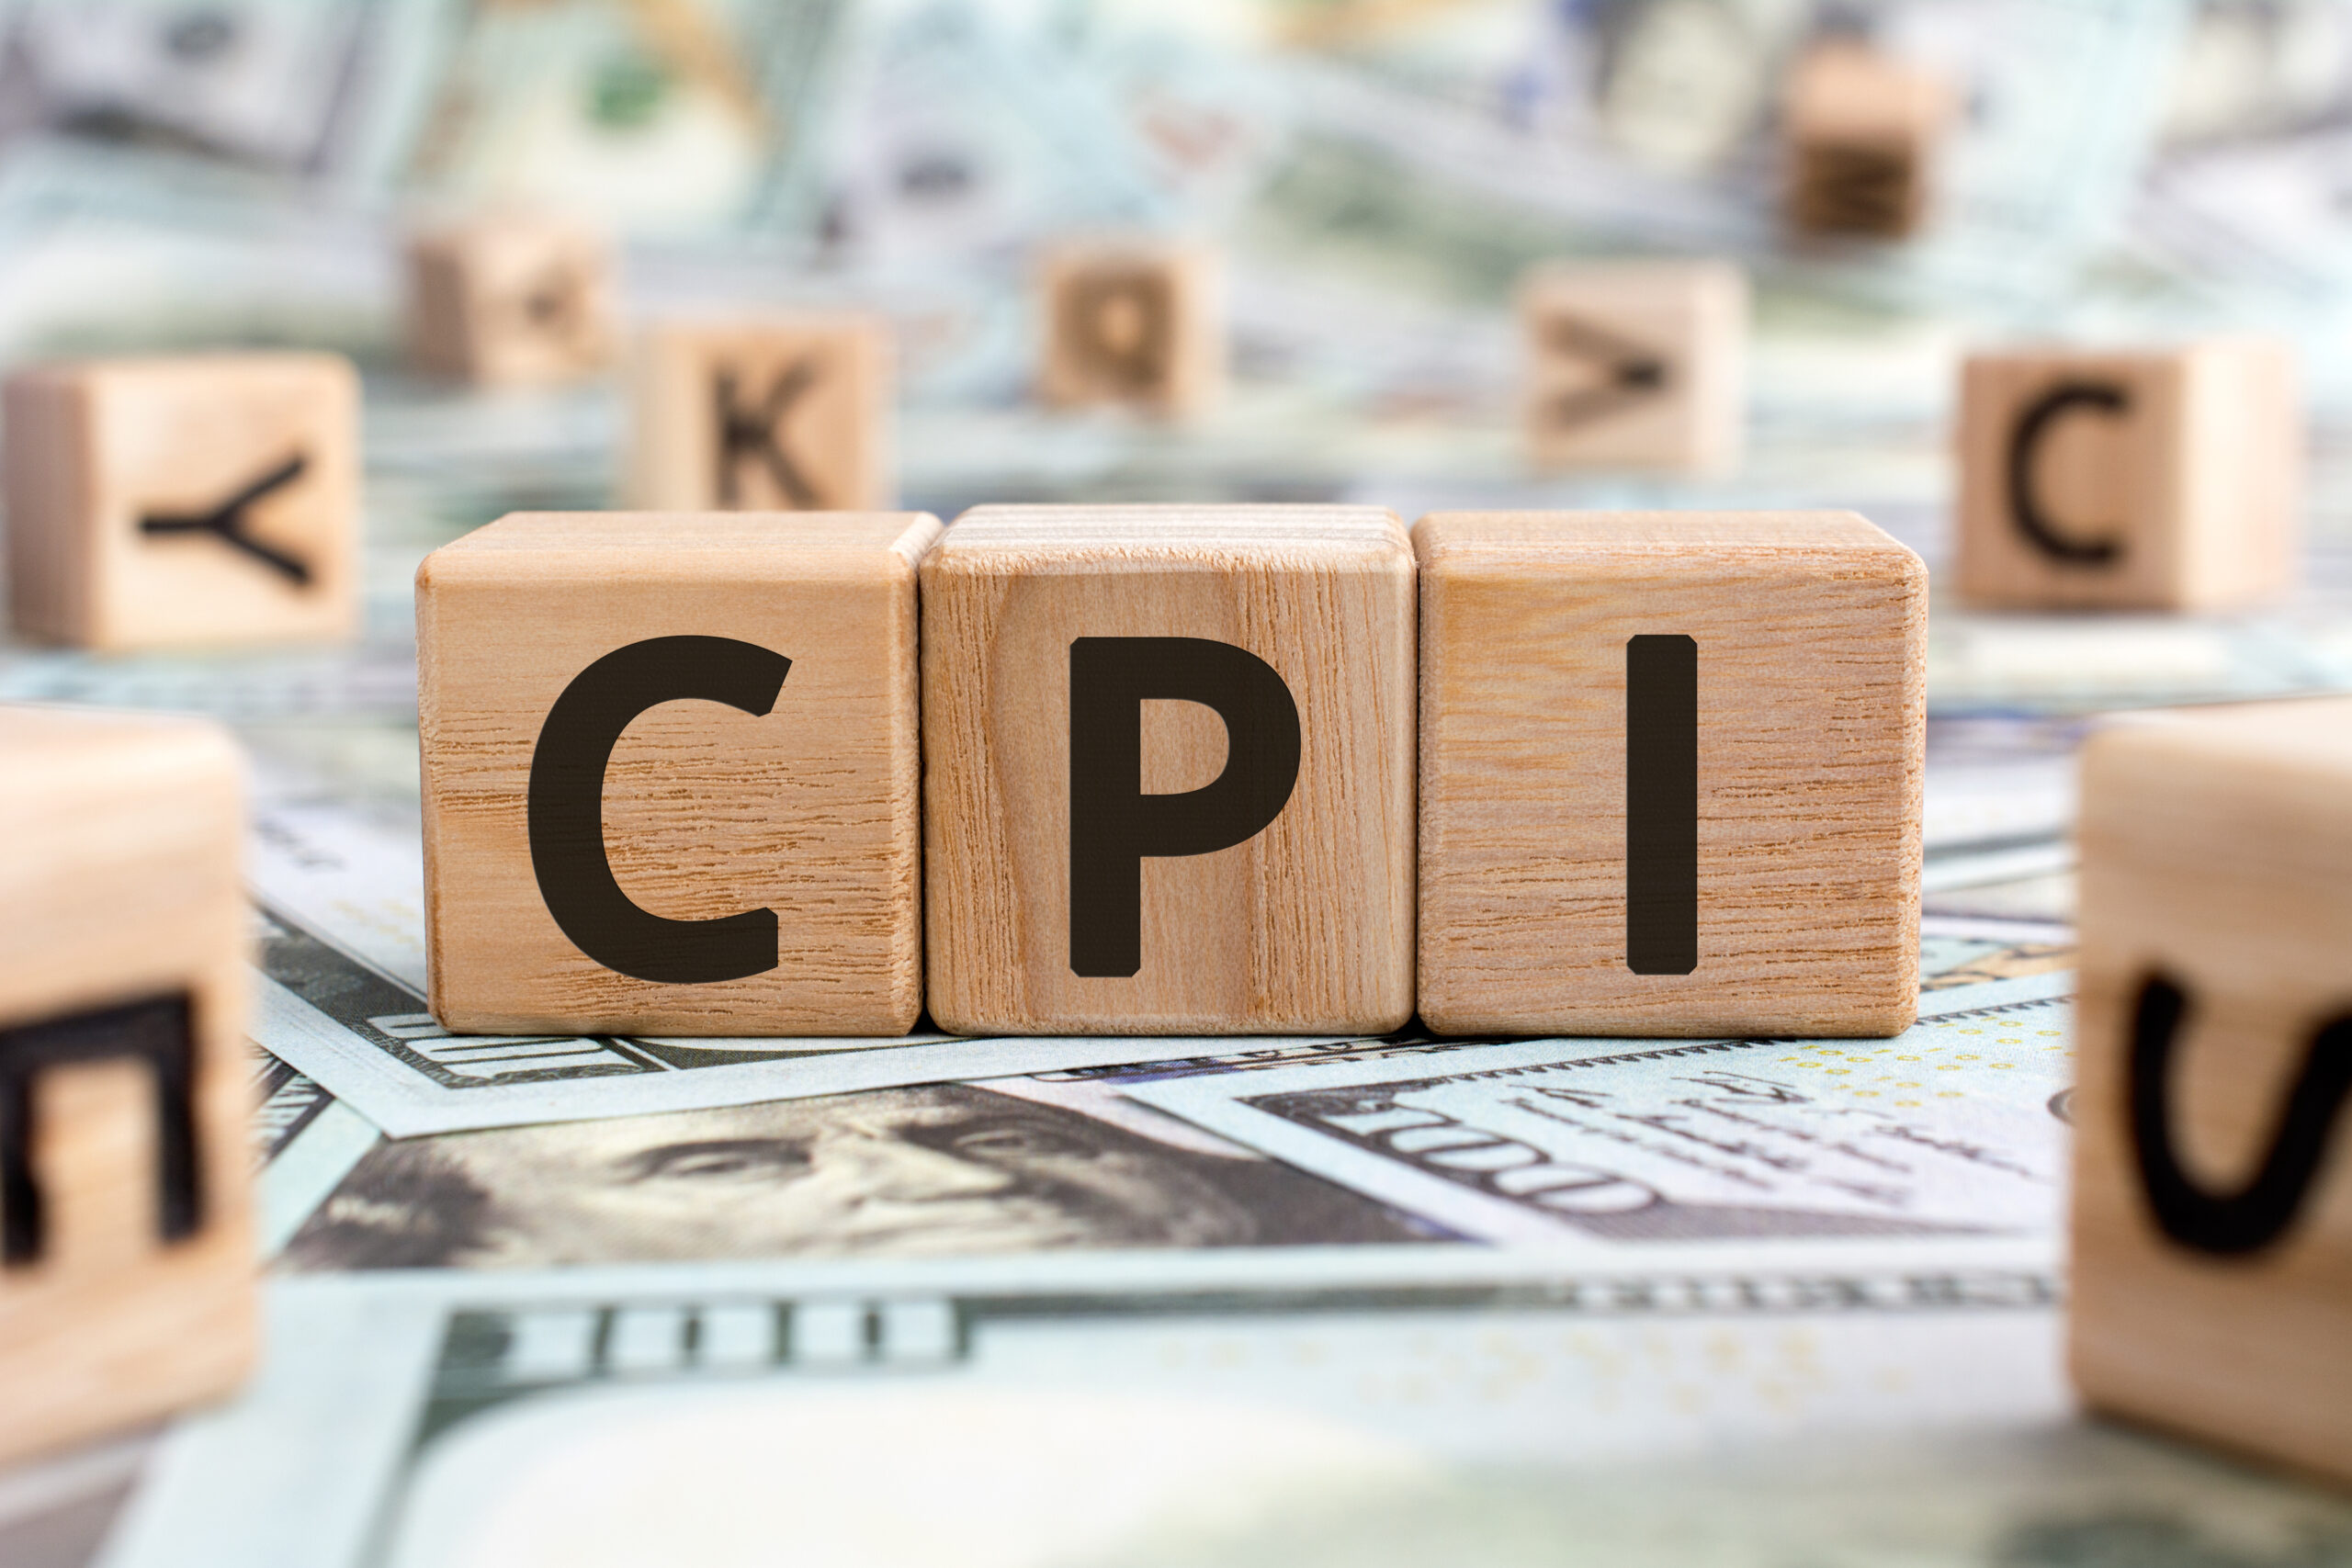 Consumer Price Index (CPI): 6 Economic Indicators Small Businesses NEED to Watch, Part 3